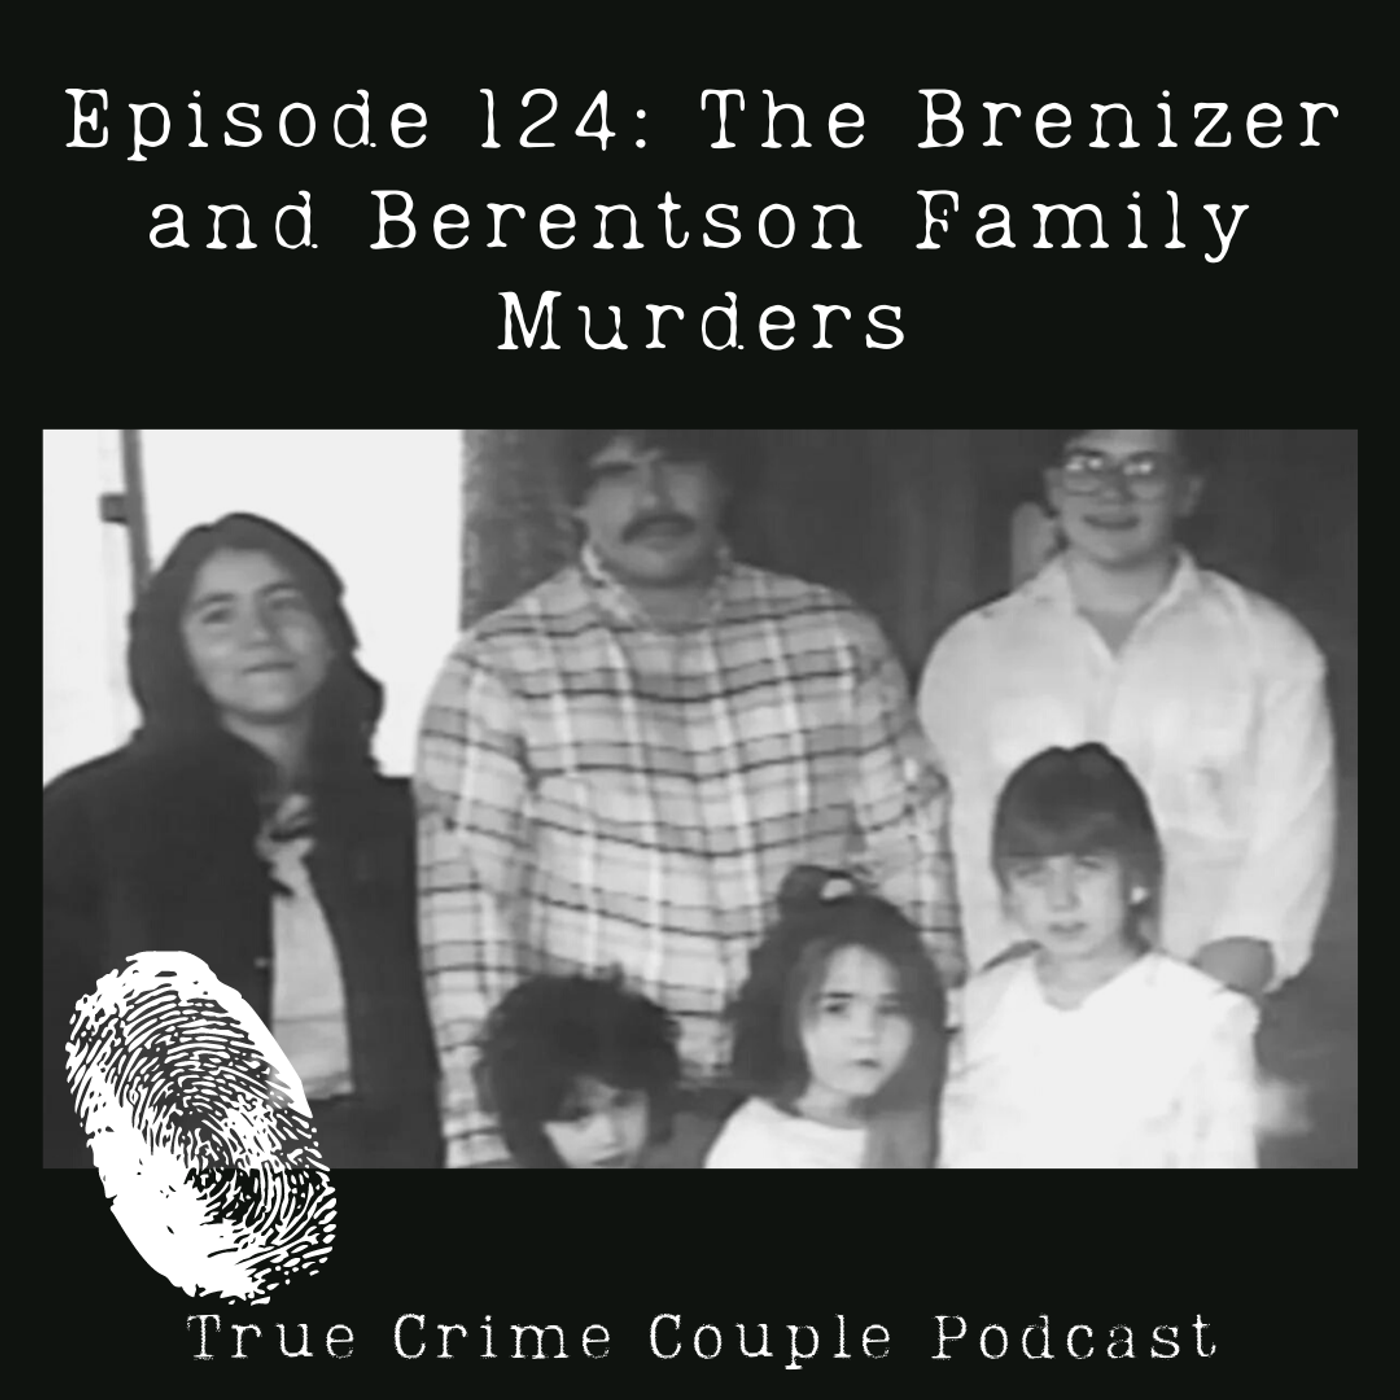 Episode 124: The Brenizer and Berentson Family Murders